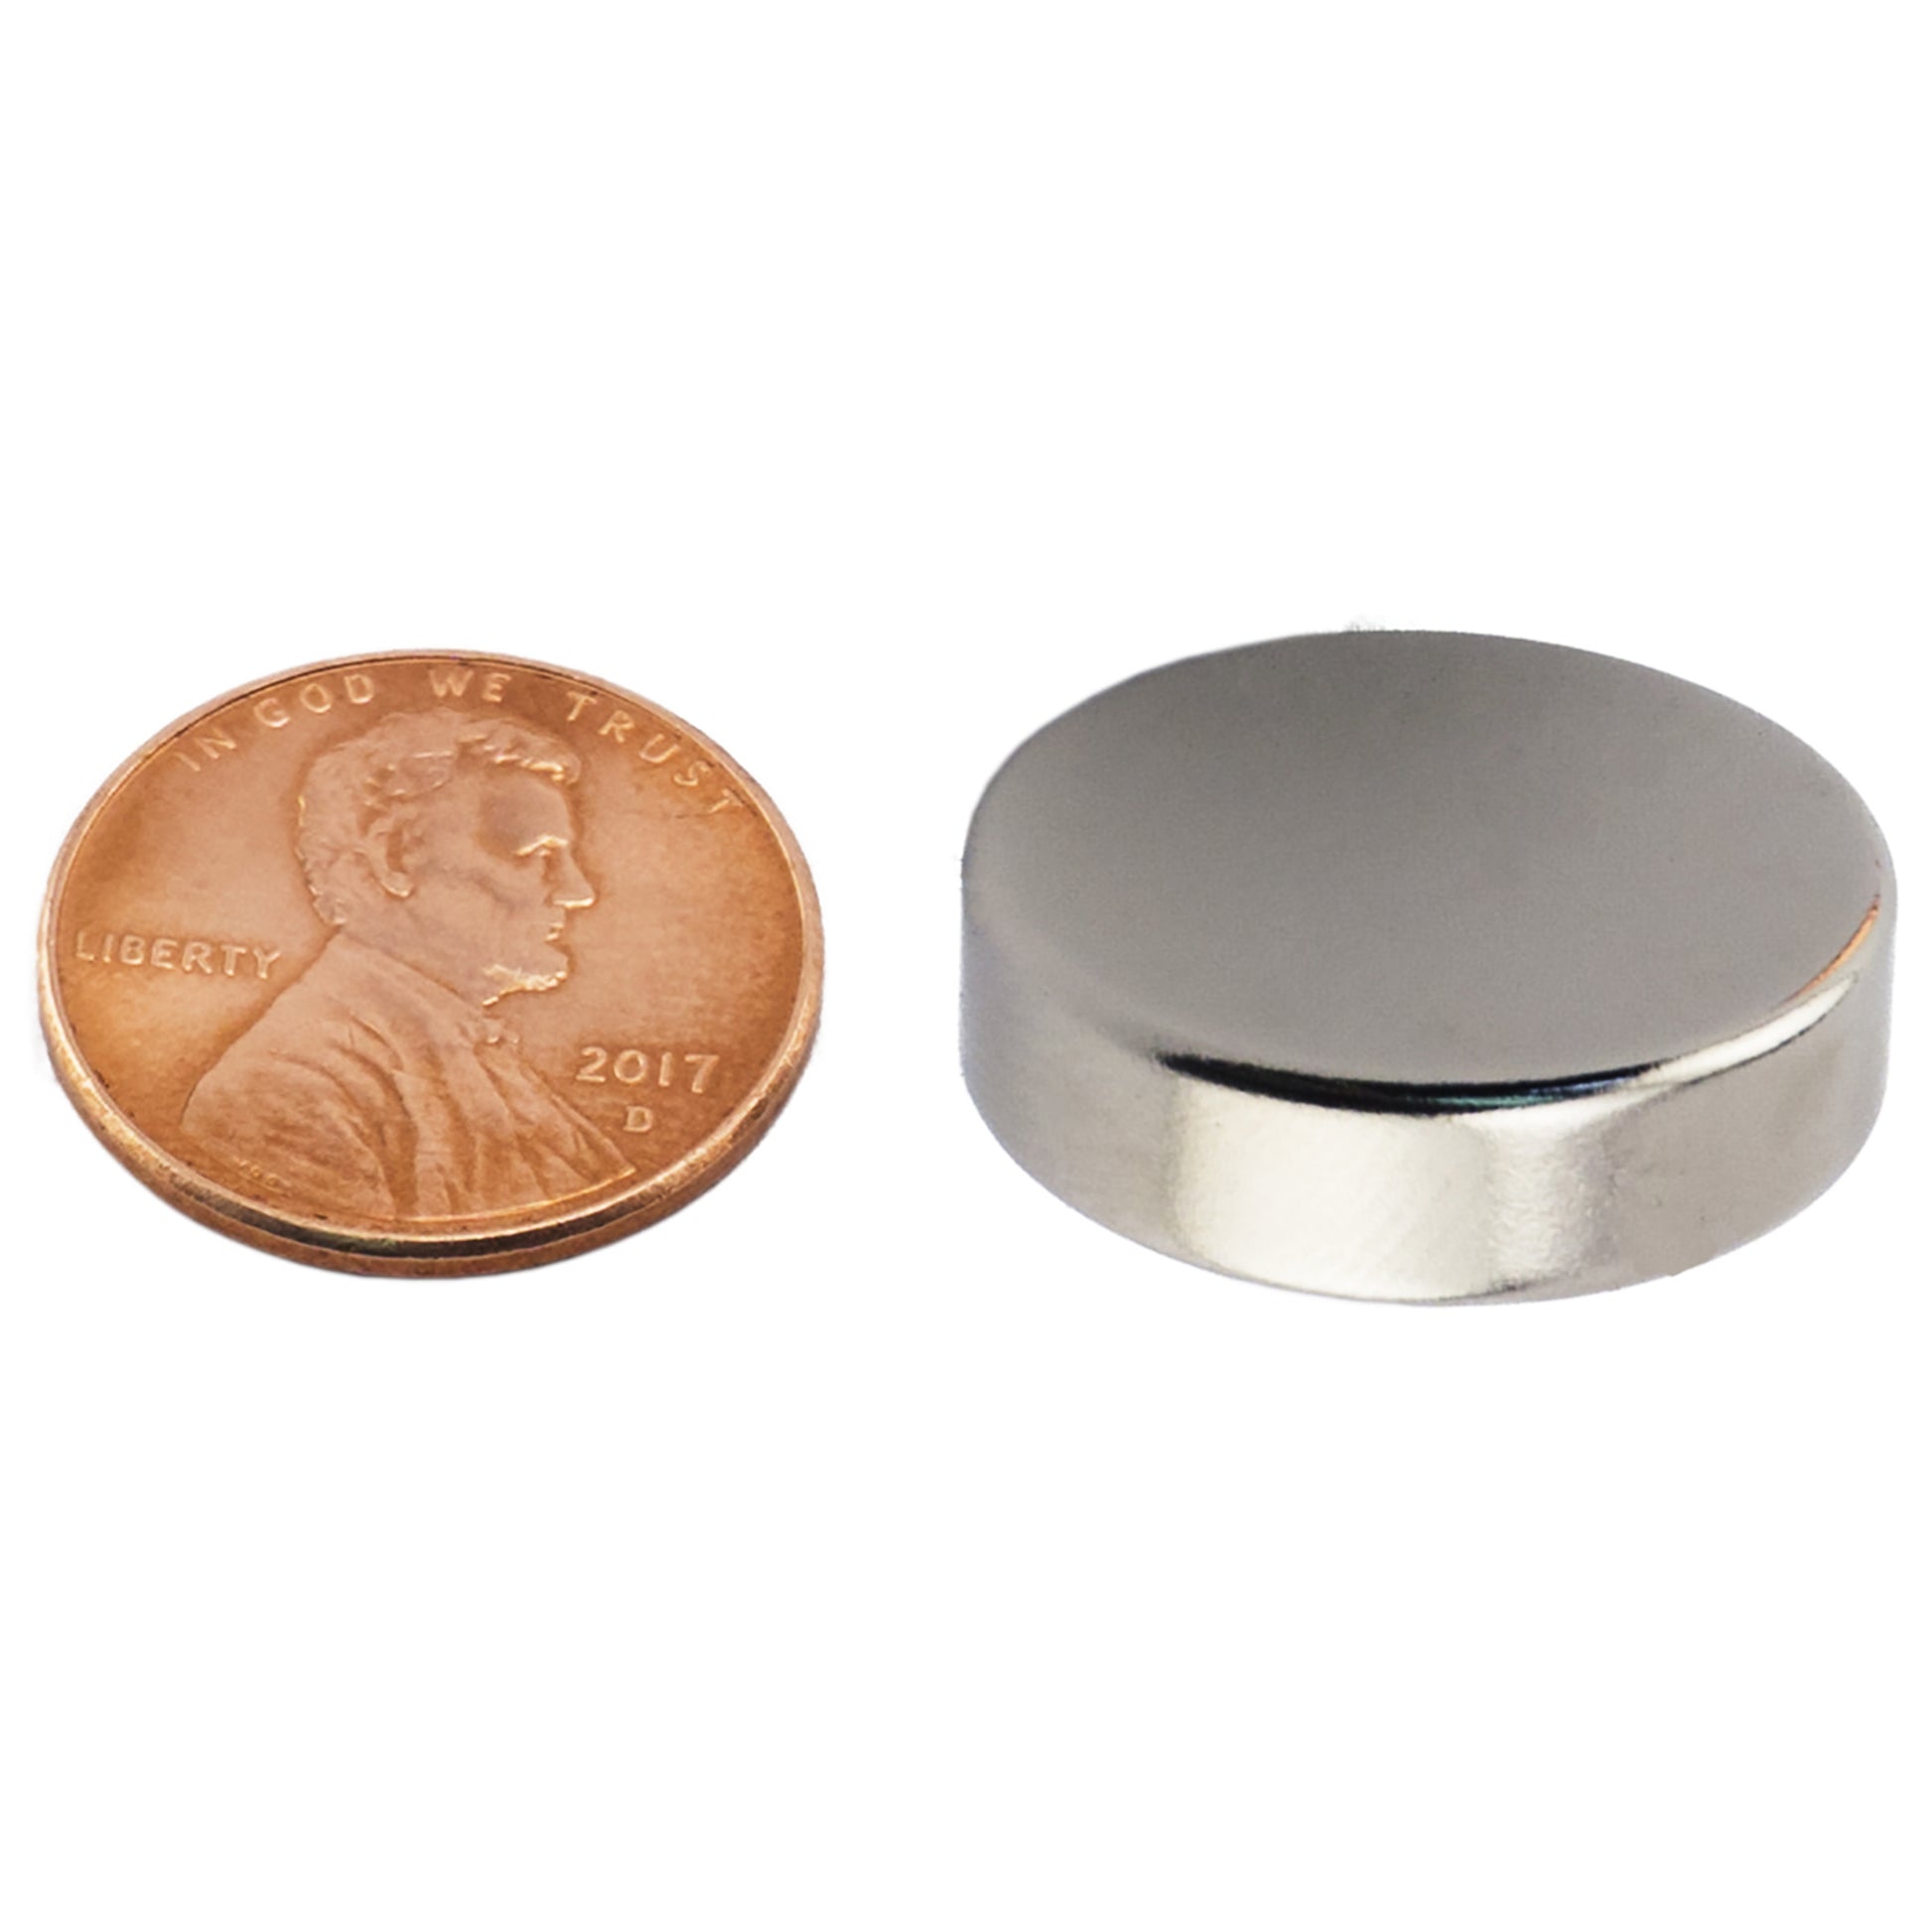 Load image into Gallery viewer, ND008714N Neodymium Disc Magnet - Compared to Penny for Size Reference